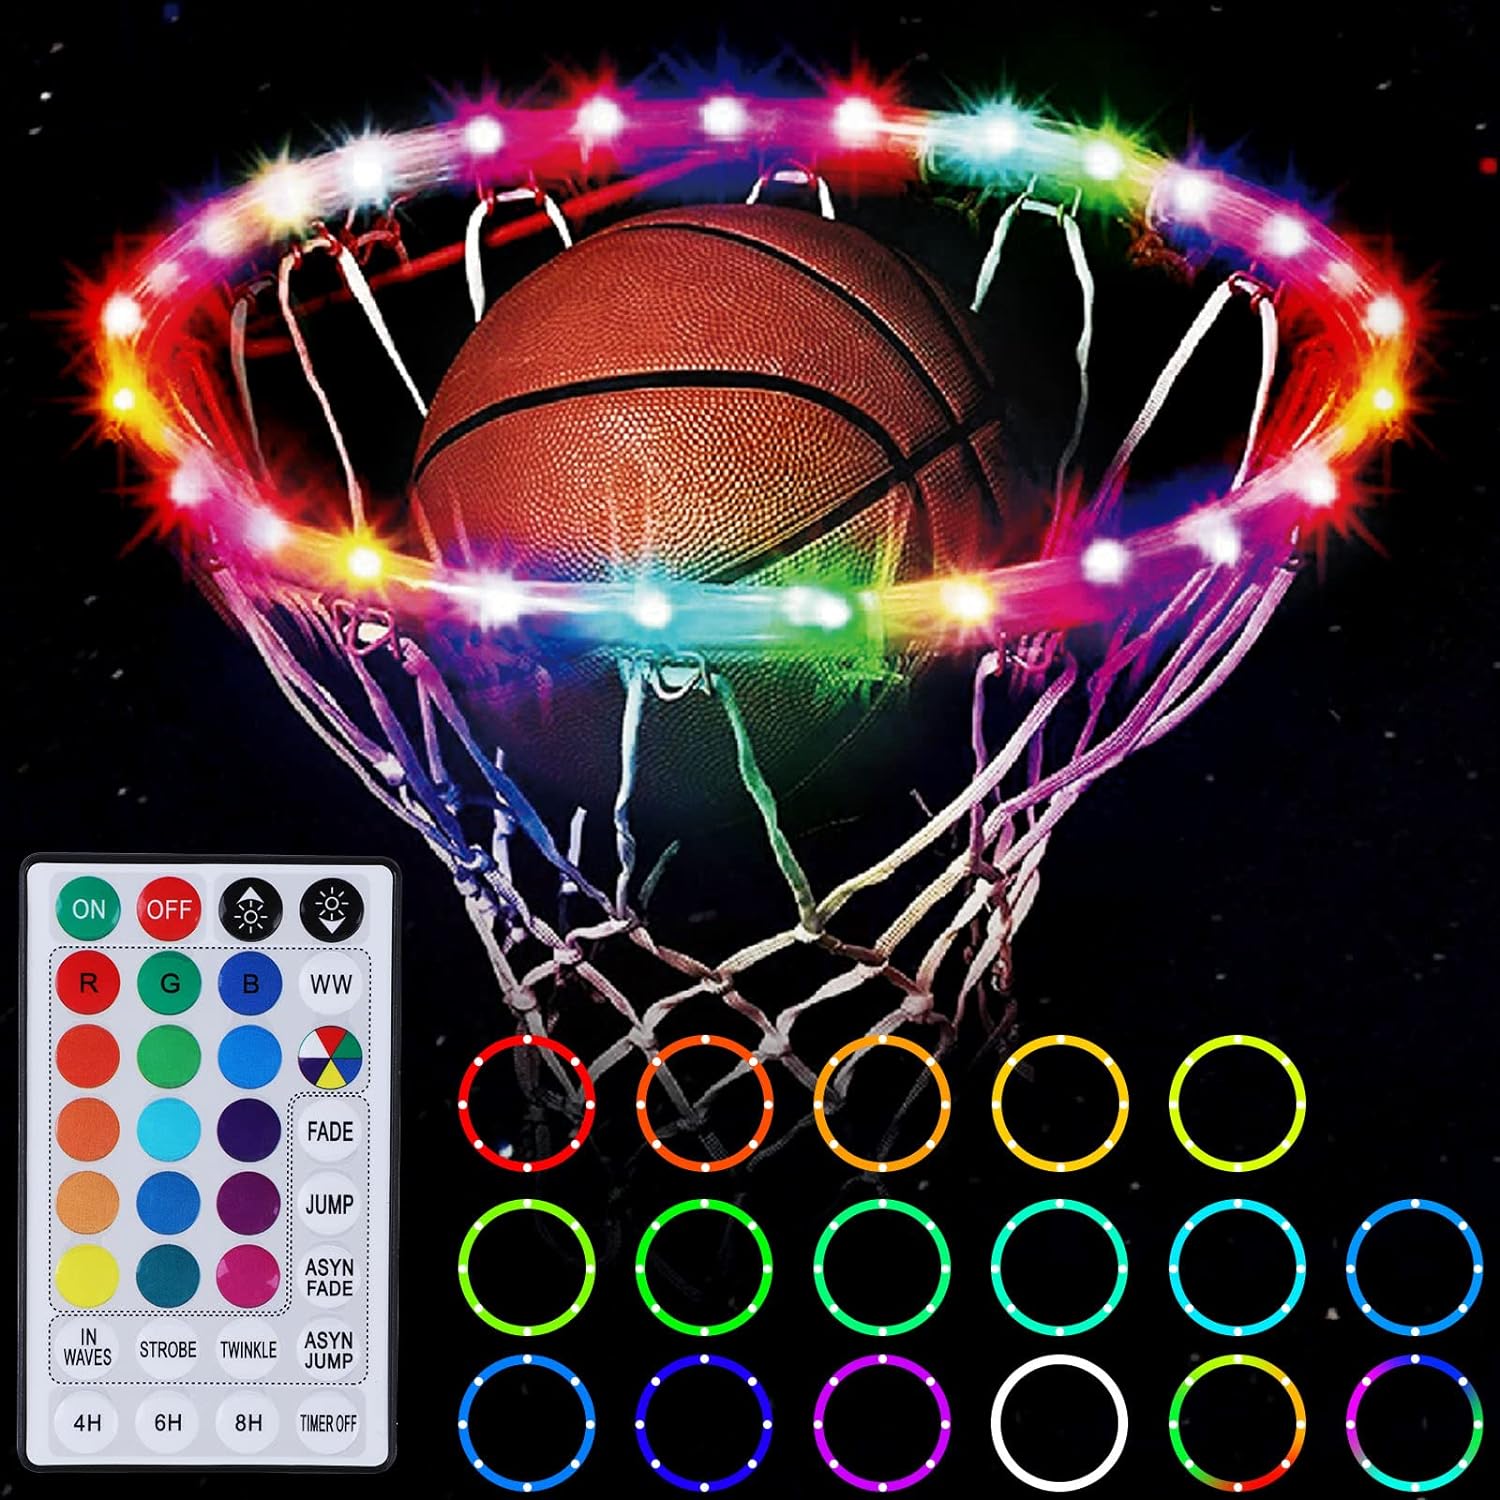 this makes a great gift and it' very easy to install on the hoop and the lights look great